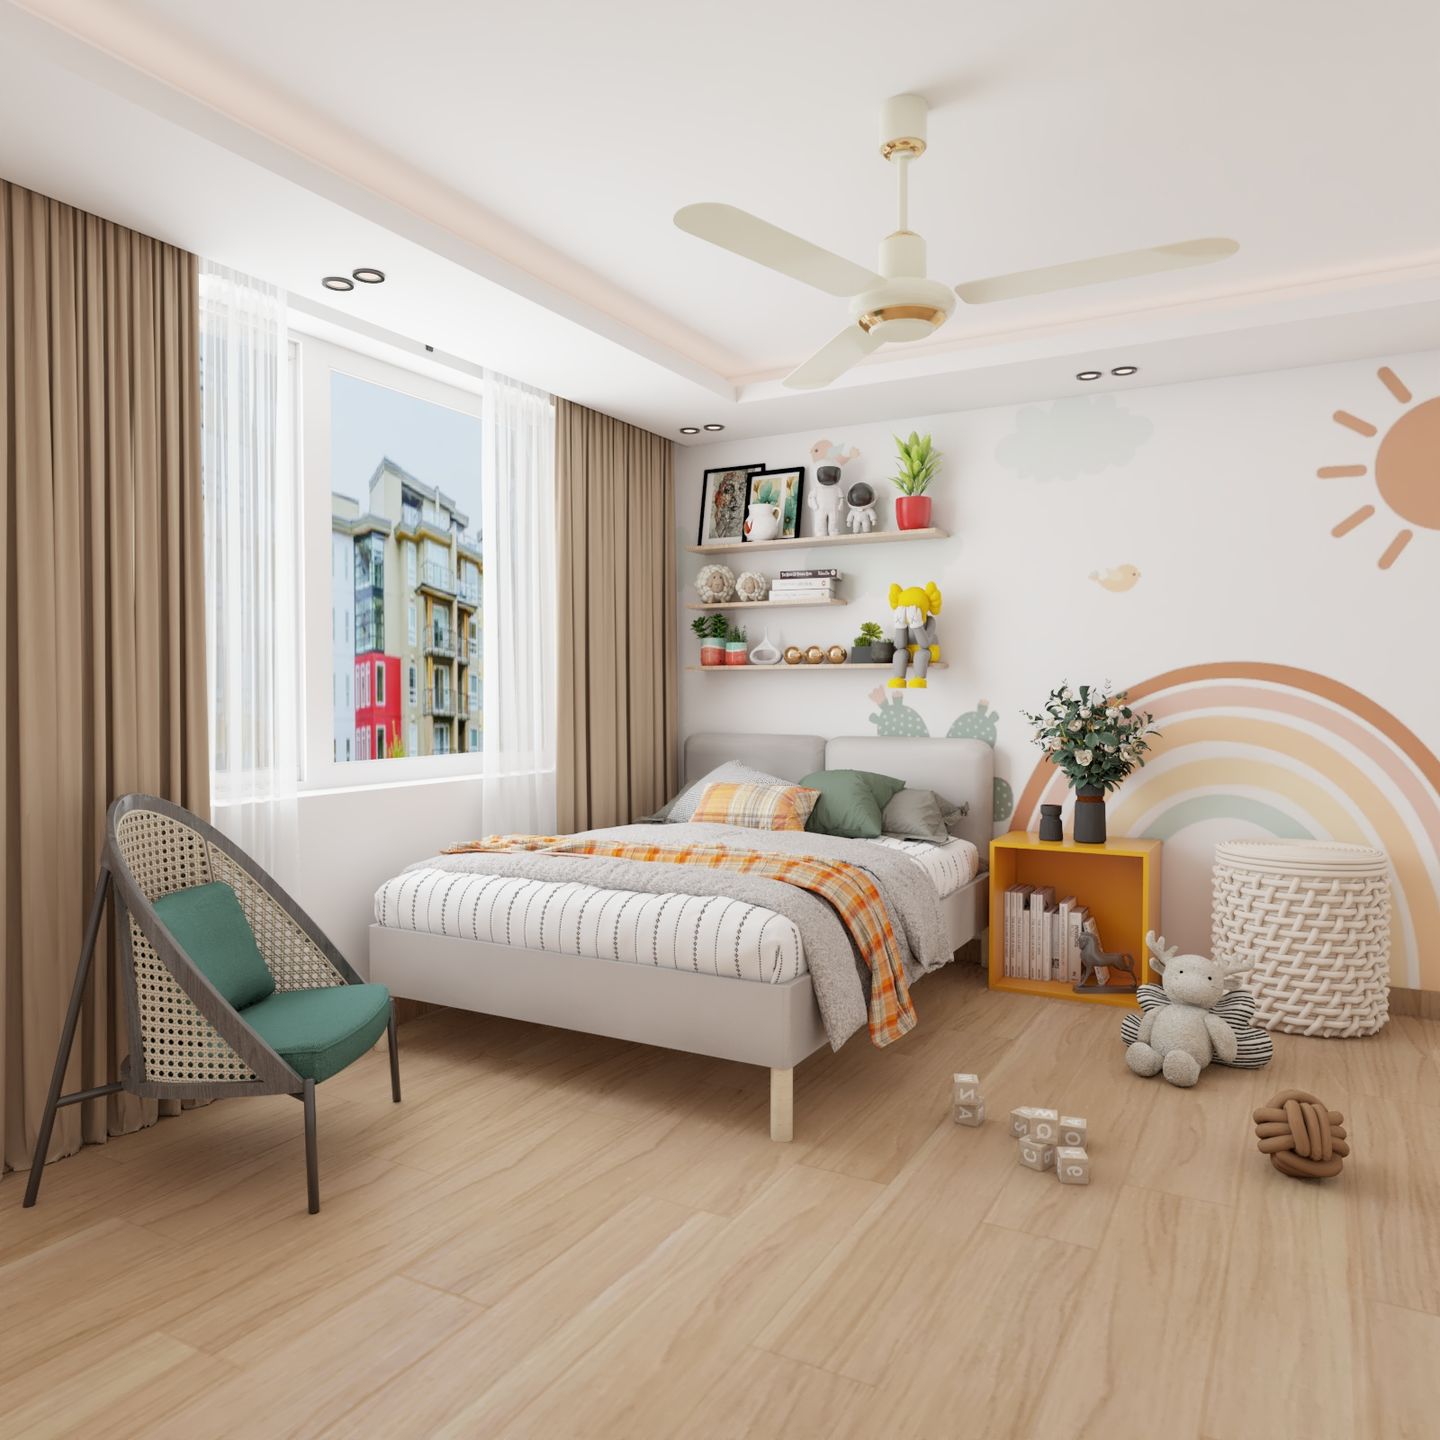 Kids Room Design With Rainbow-Themed Wallpaper - Livspace